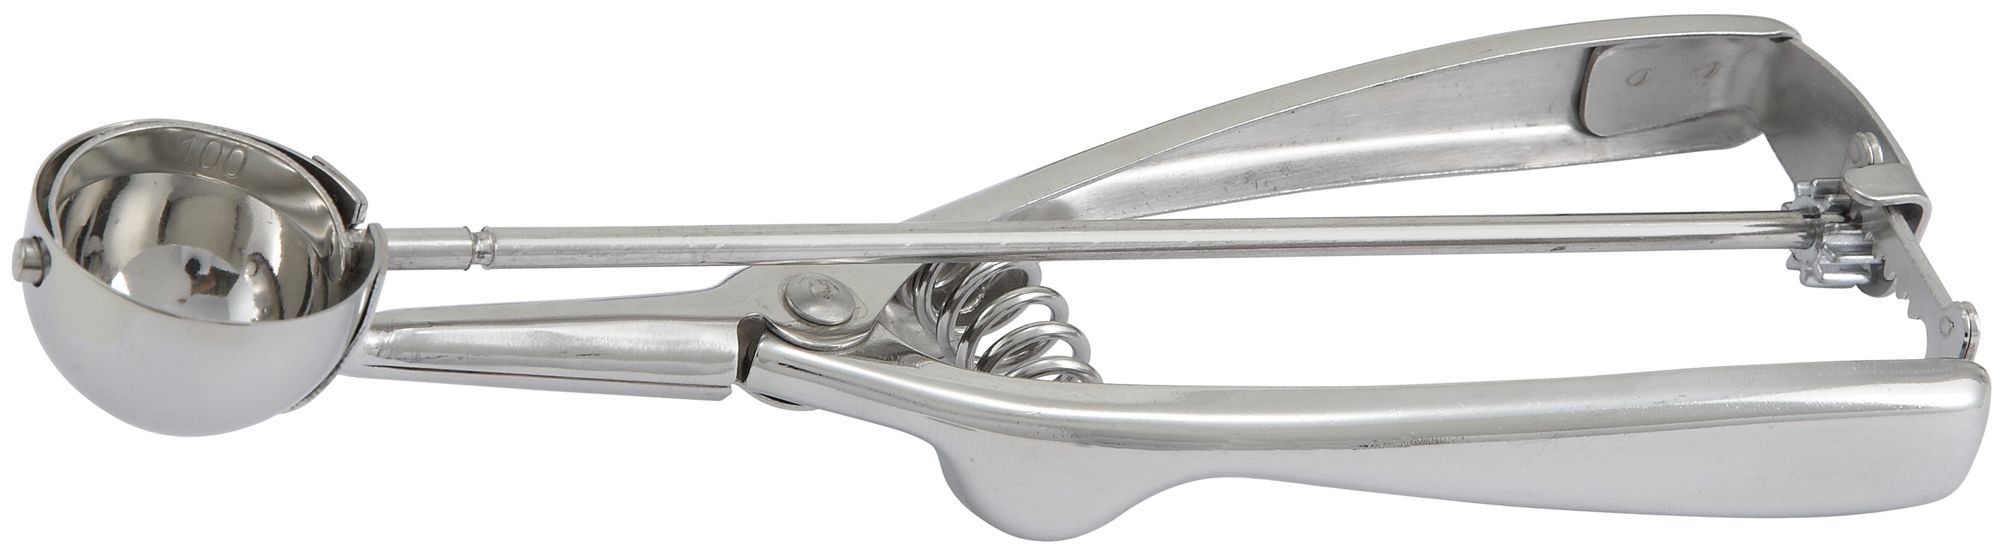 Winco ISS-100 Stainless Steel 3/8 oz. Disher/Portioner, Size 100